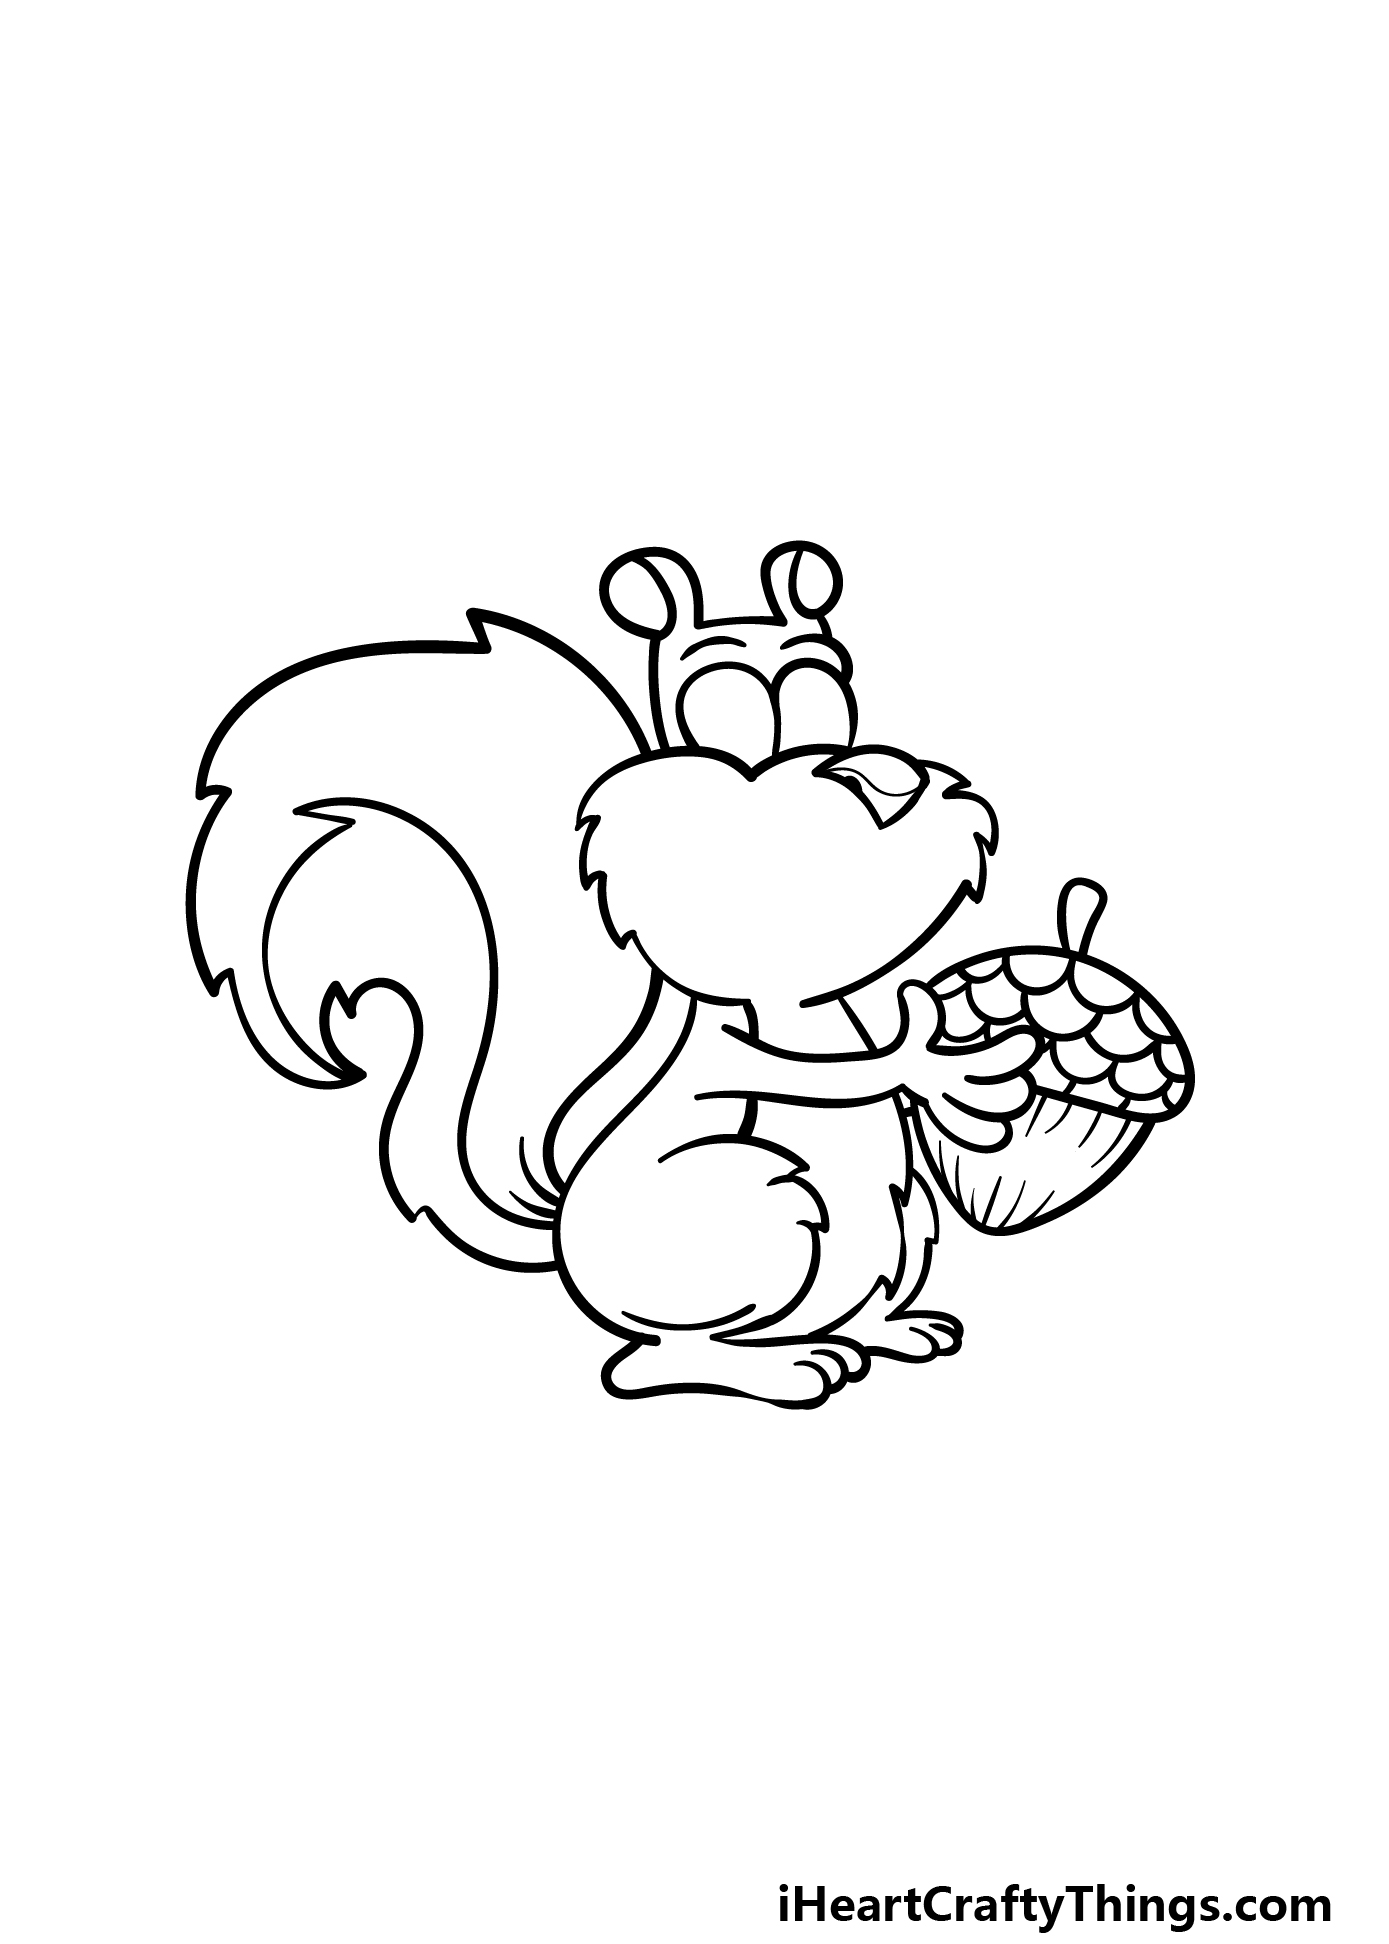 how to draw a cartoon squirrel step 4